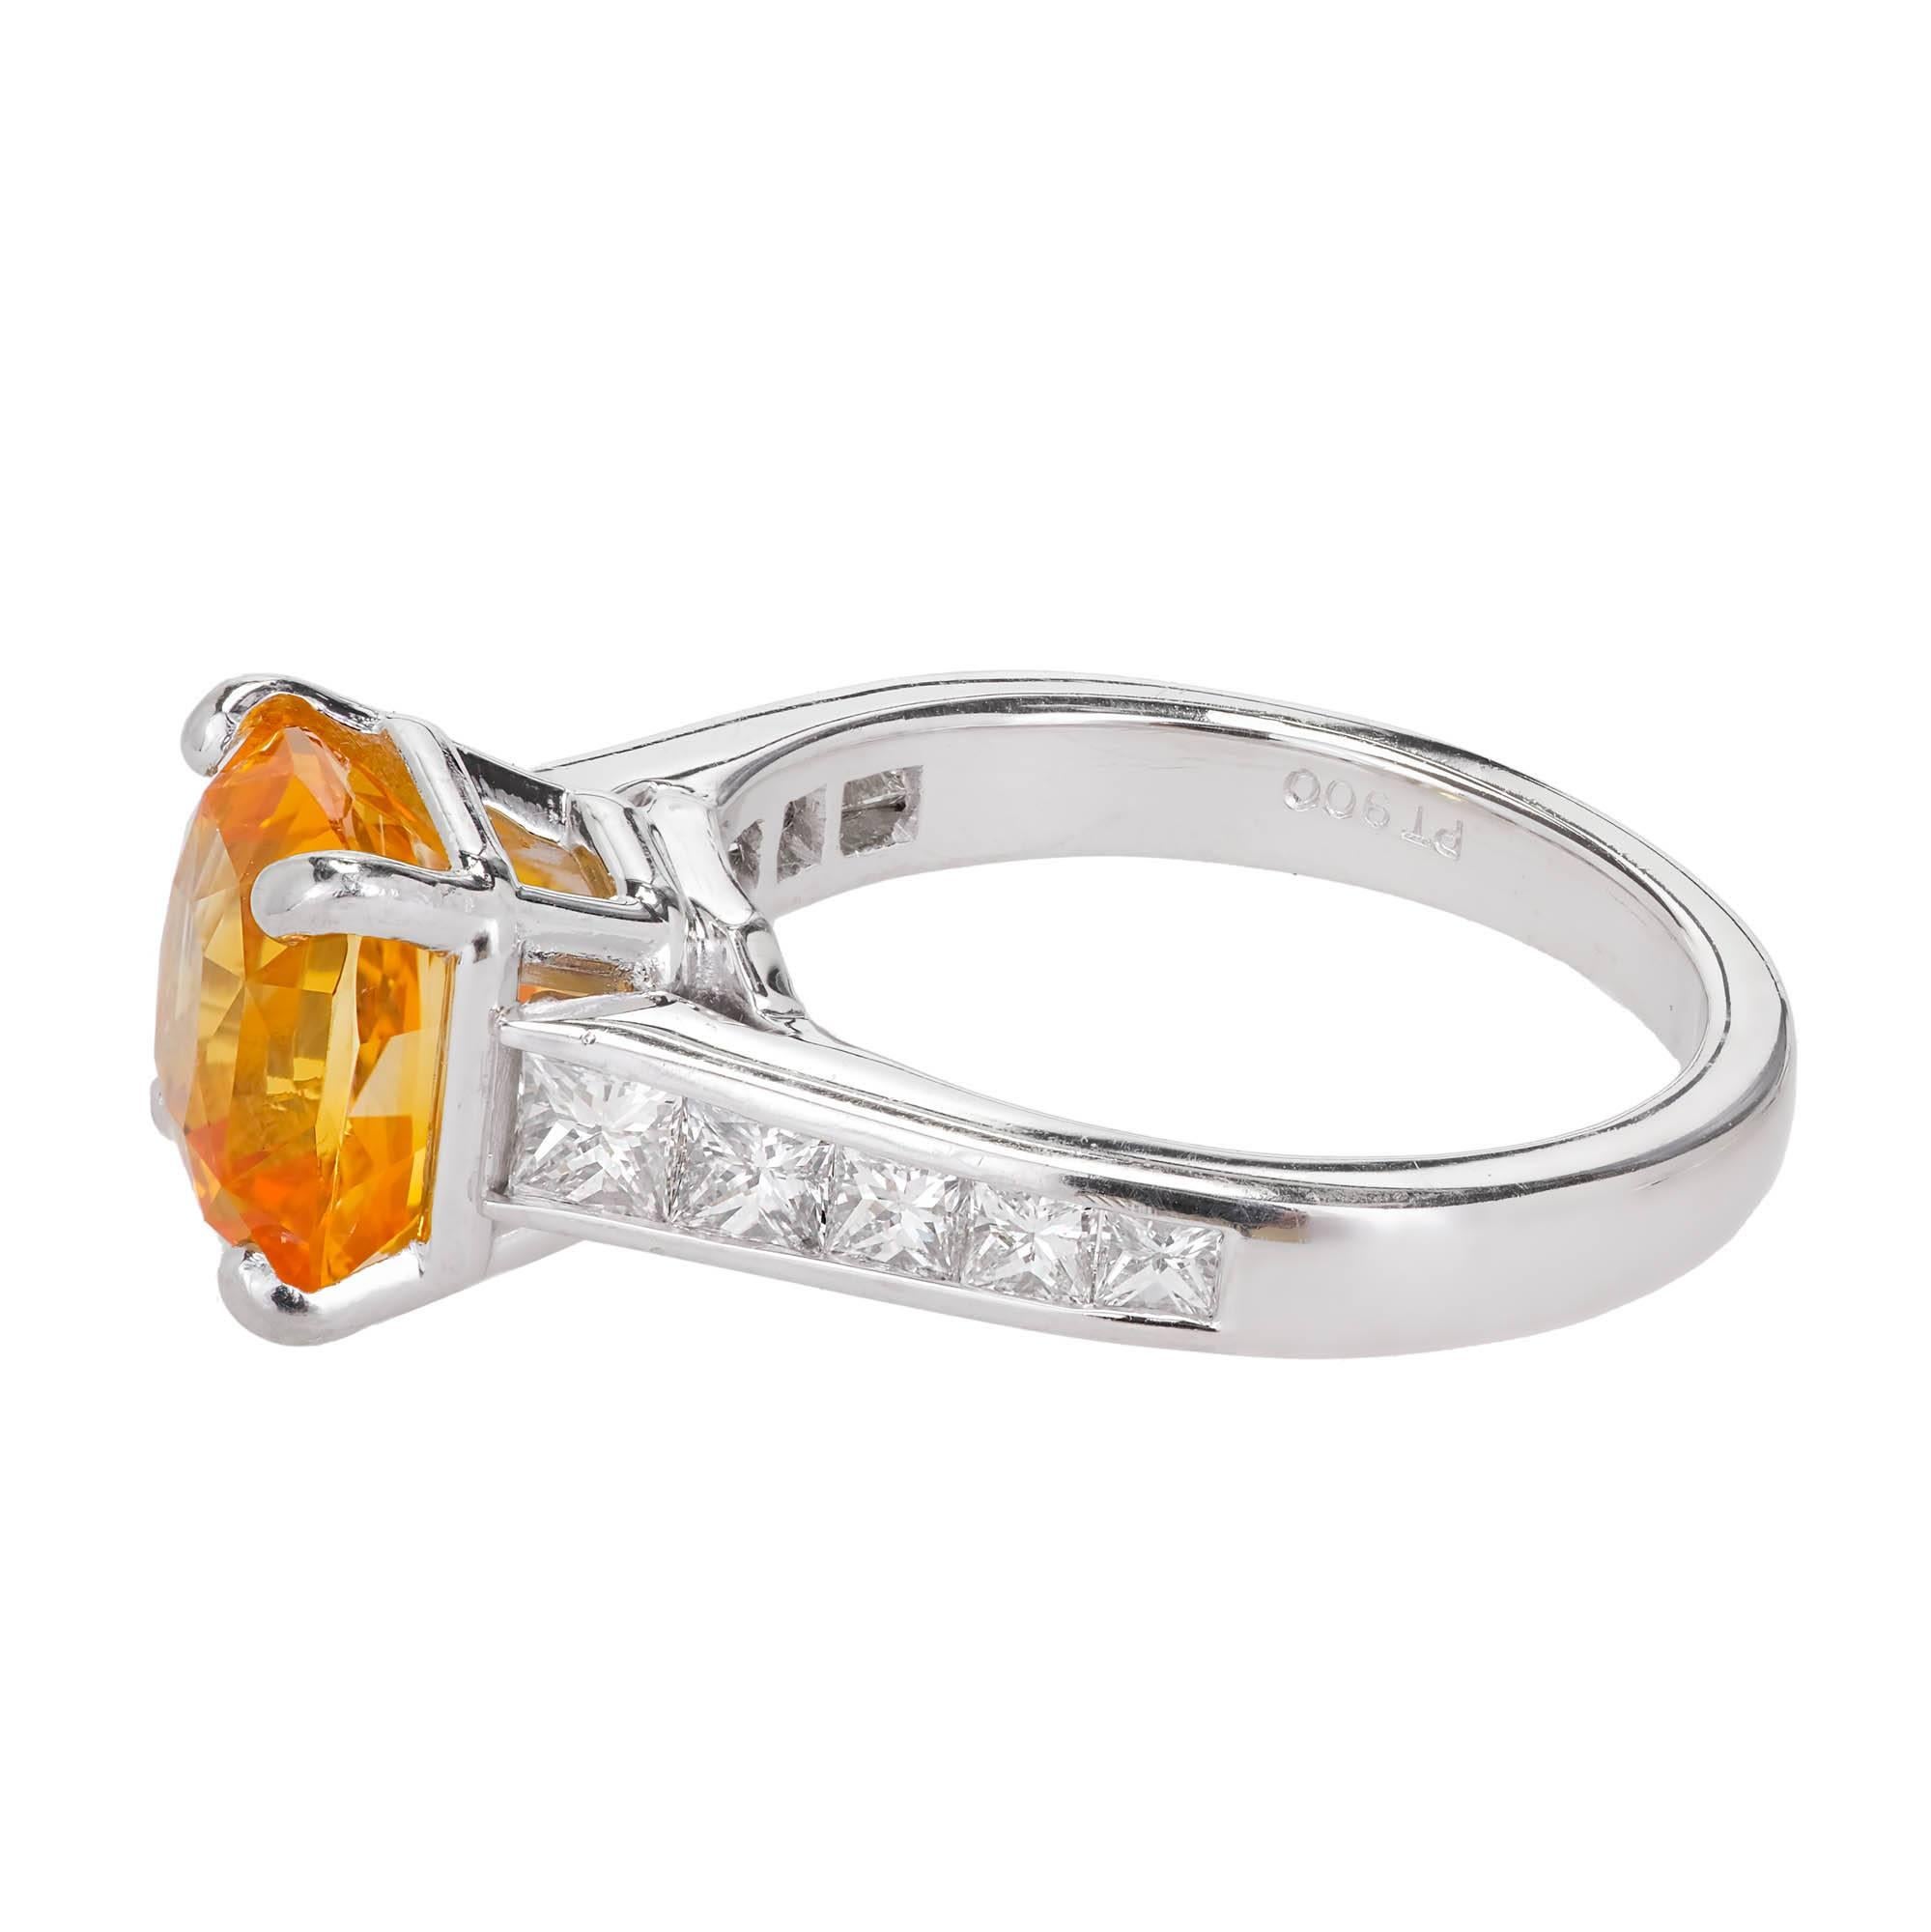 JB Star 4.41 Carat Yellow Orange Sapphire Diamond Platinum Engagement Ring In Excellent Condition For Sale In Stamford, CT